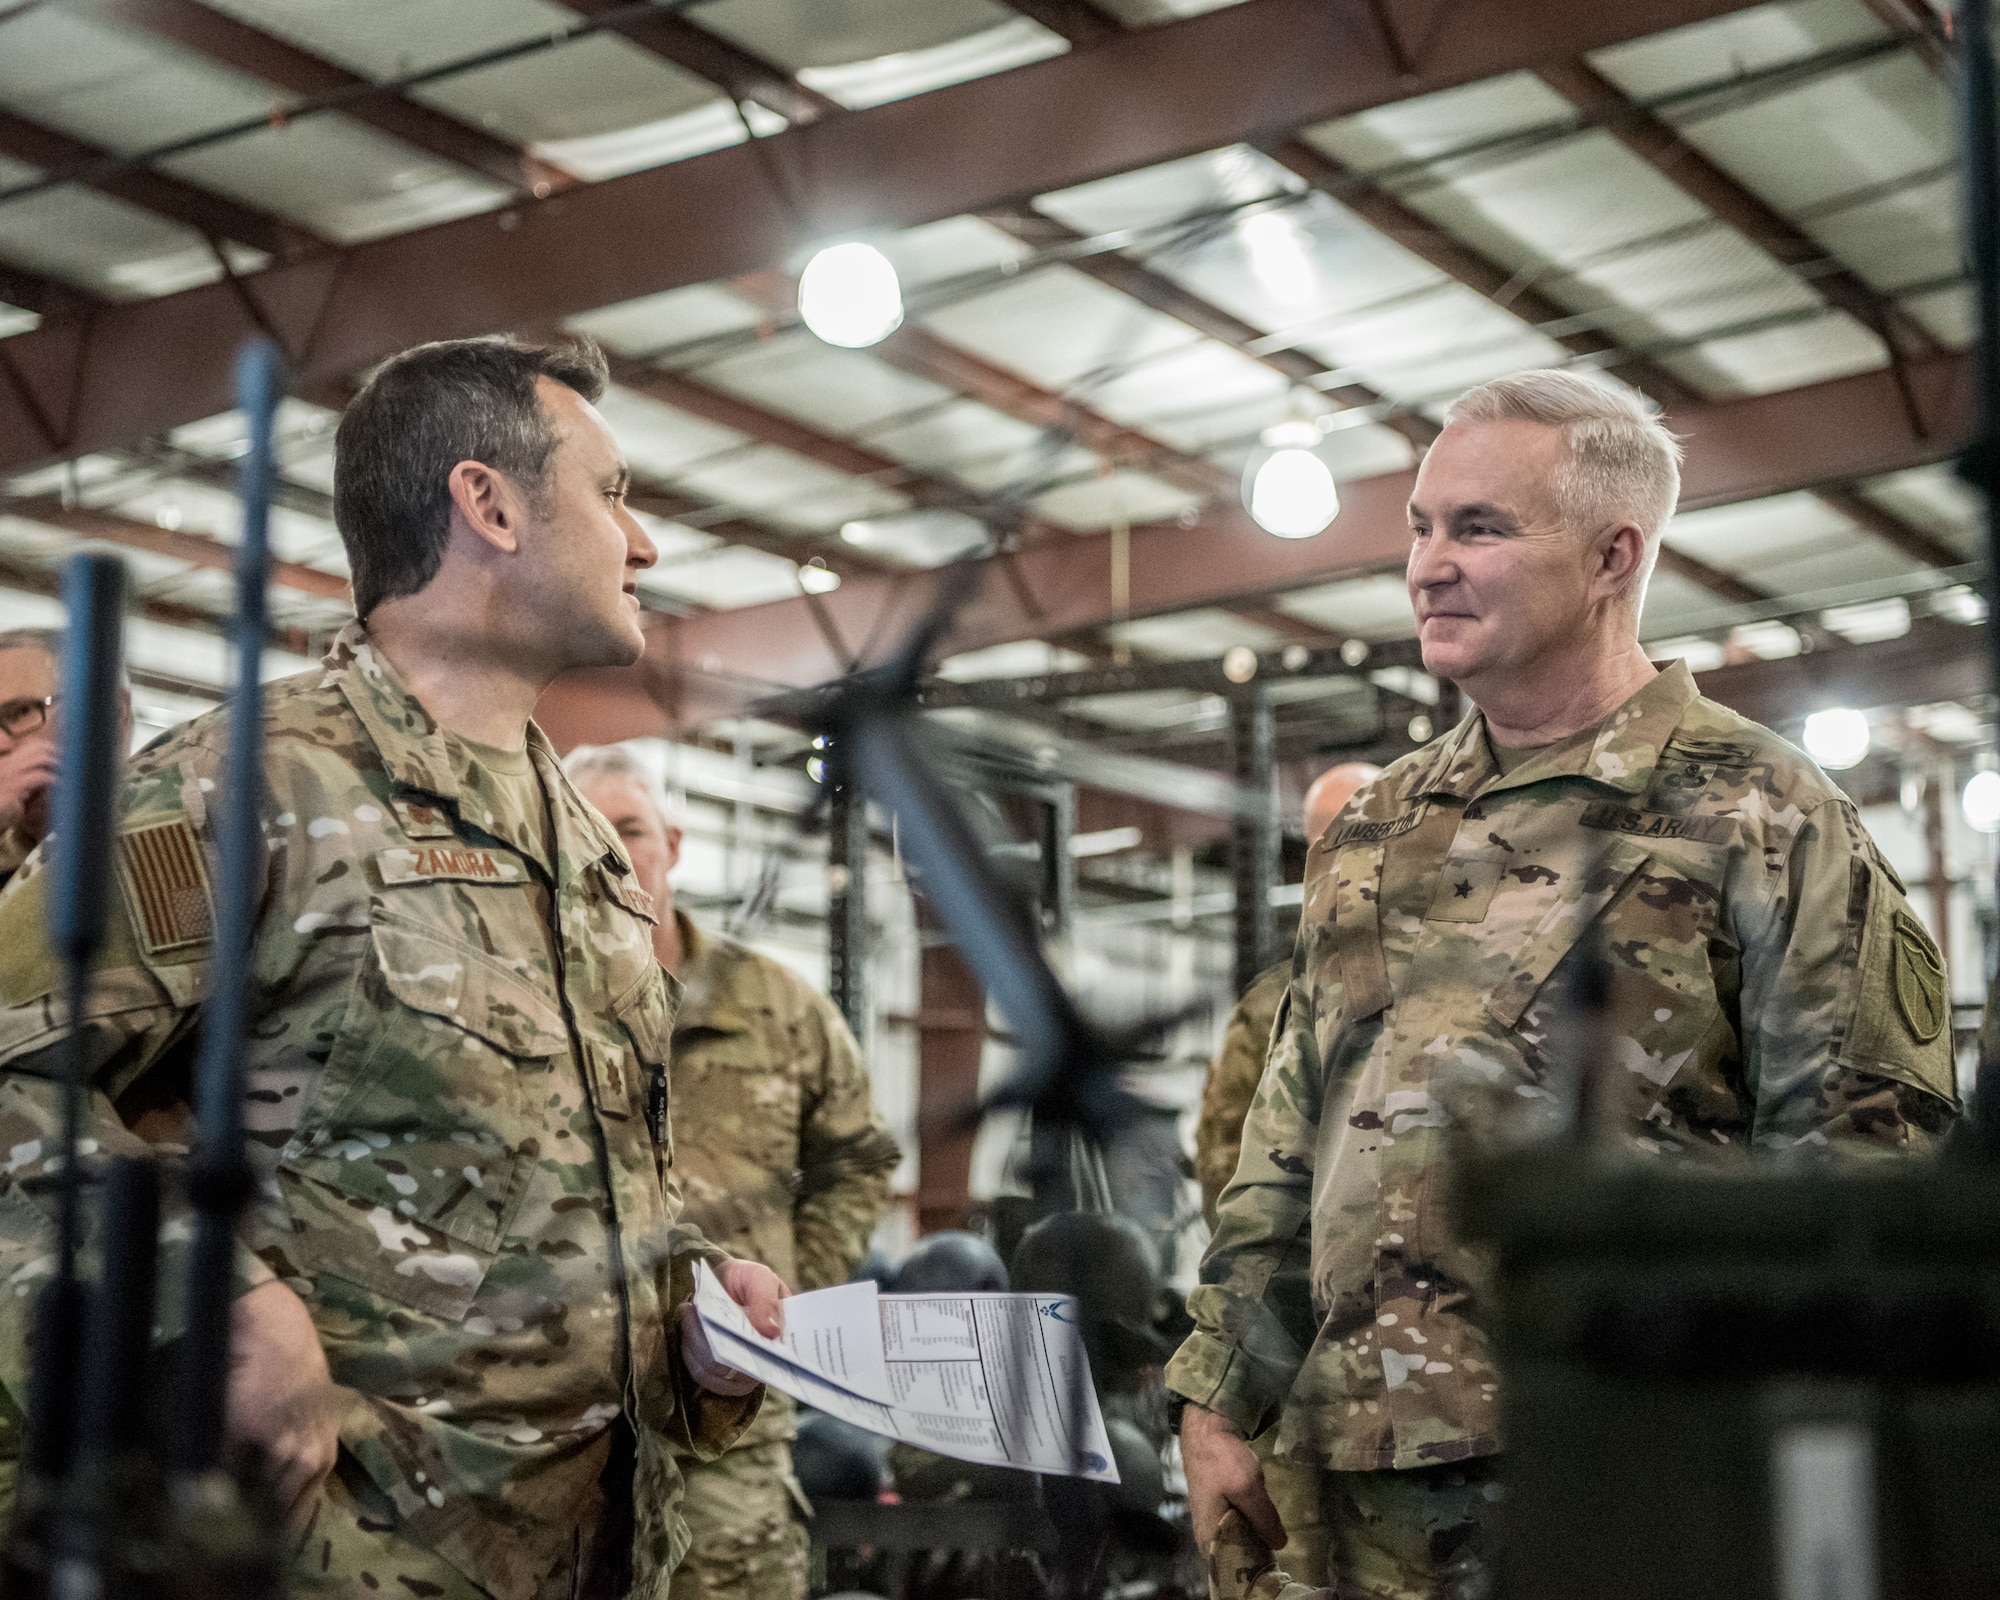 Brig. Gen. Haldane Lamberton (right), Kentucky’s newly appointed adjutant general, learns about the capabilities of the 123rd Special Tactics Squadron from Maj. Aaron Zamora, commander of the 123rd Special Tactics Squadron, during a tour of the Kentucky Air National Guard Base in Louisville, Ky., on Jan. 28, 2020. Lamberton visited various work centers, learning about the unique mission sets of the 123rd Airlift Wing. (U.S. Air National Guard photo by Staff Sgt. Joshua Horton)